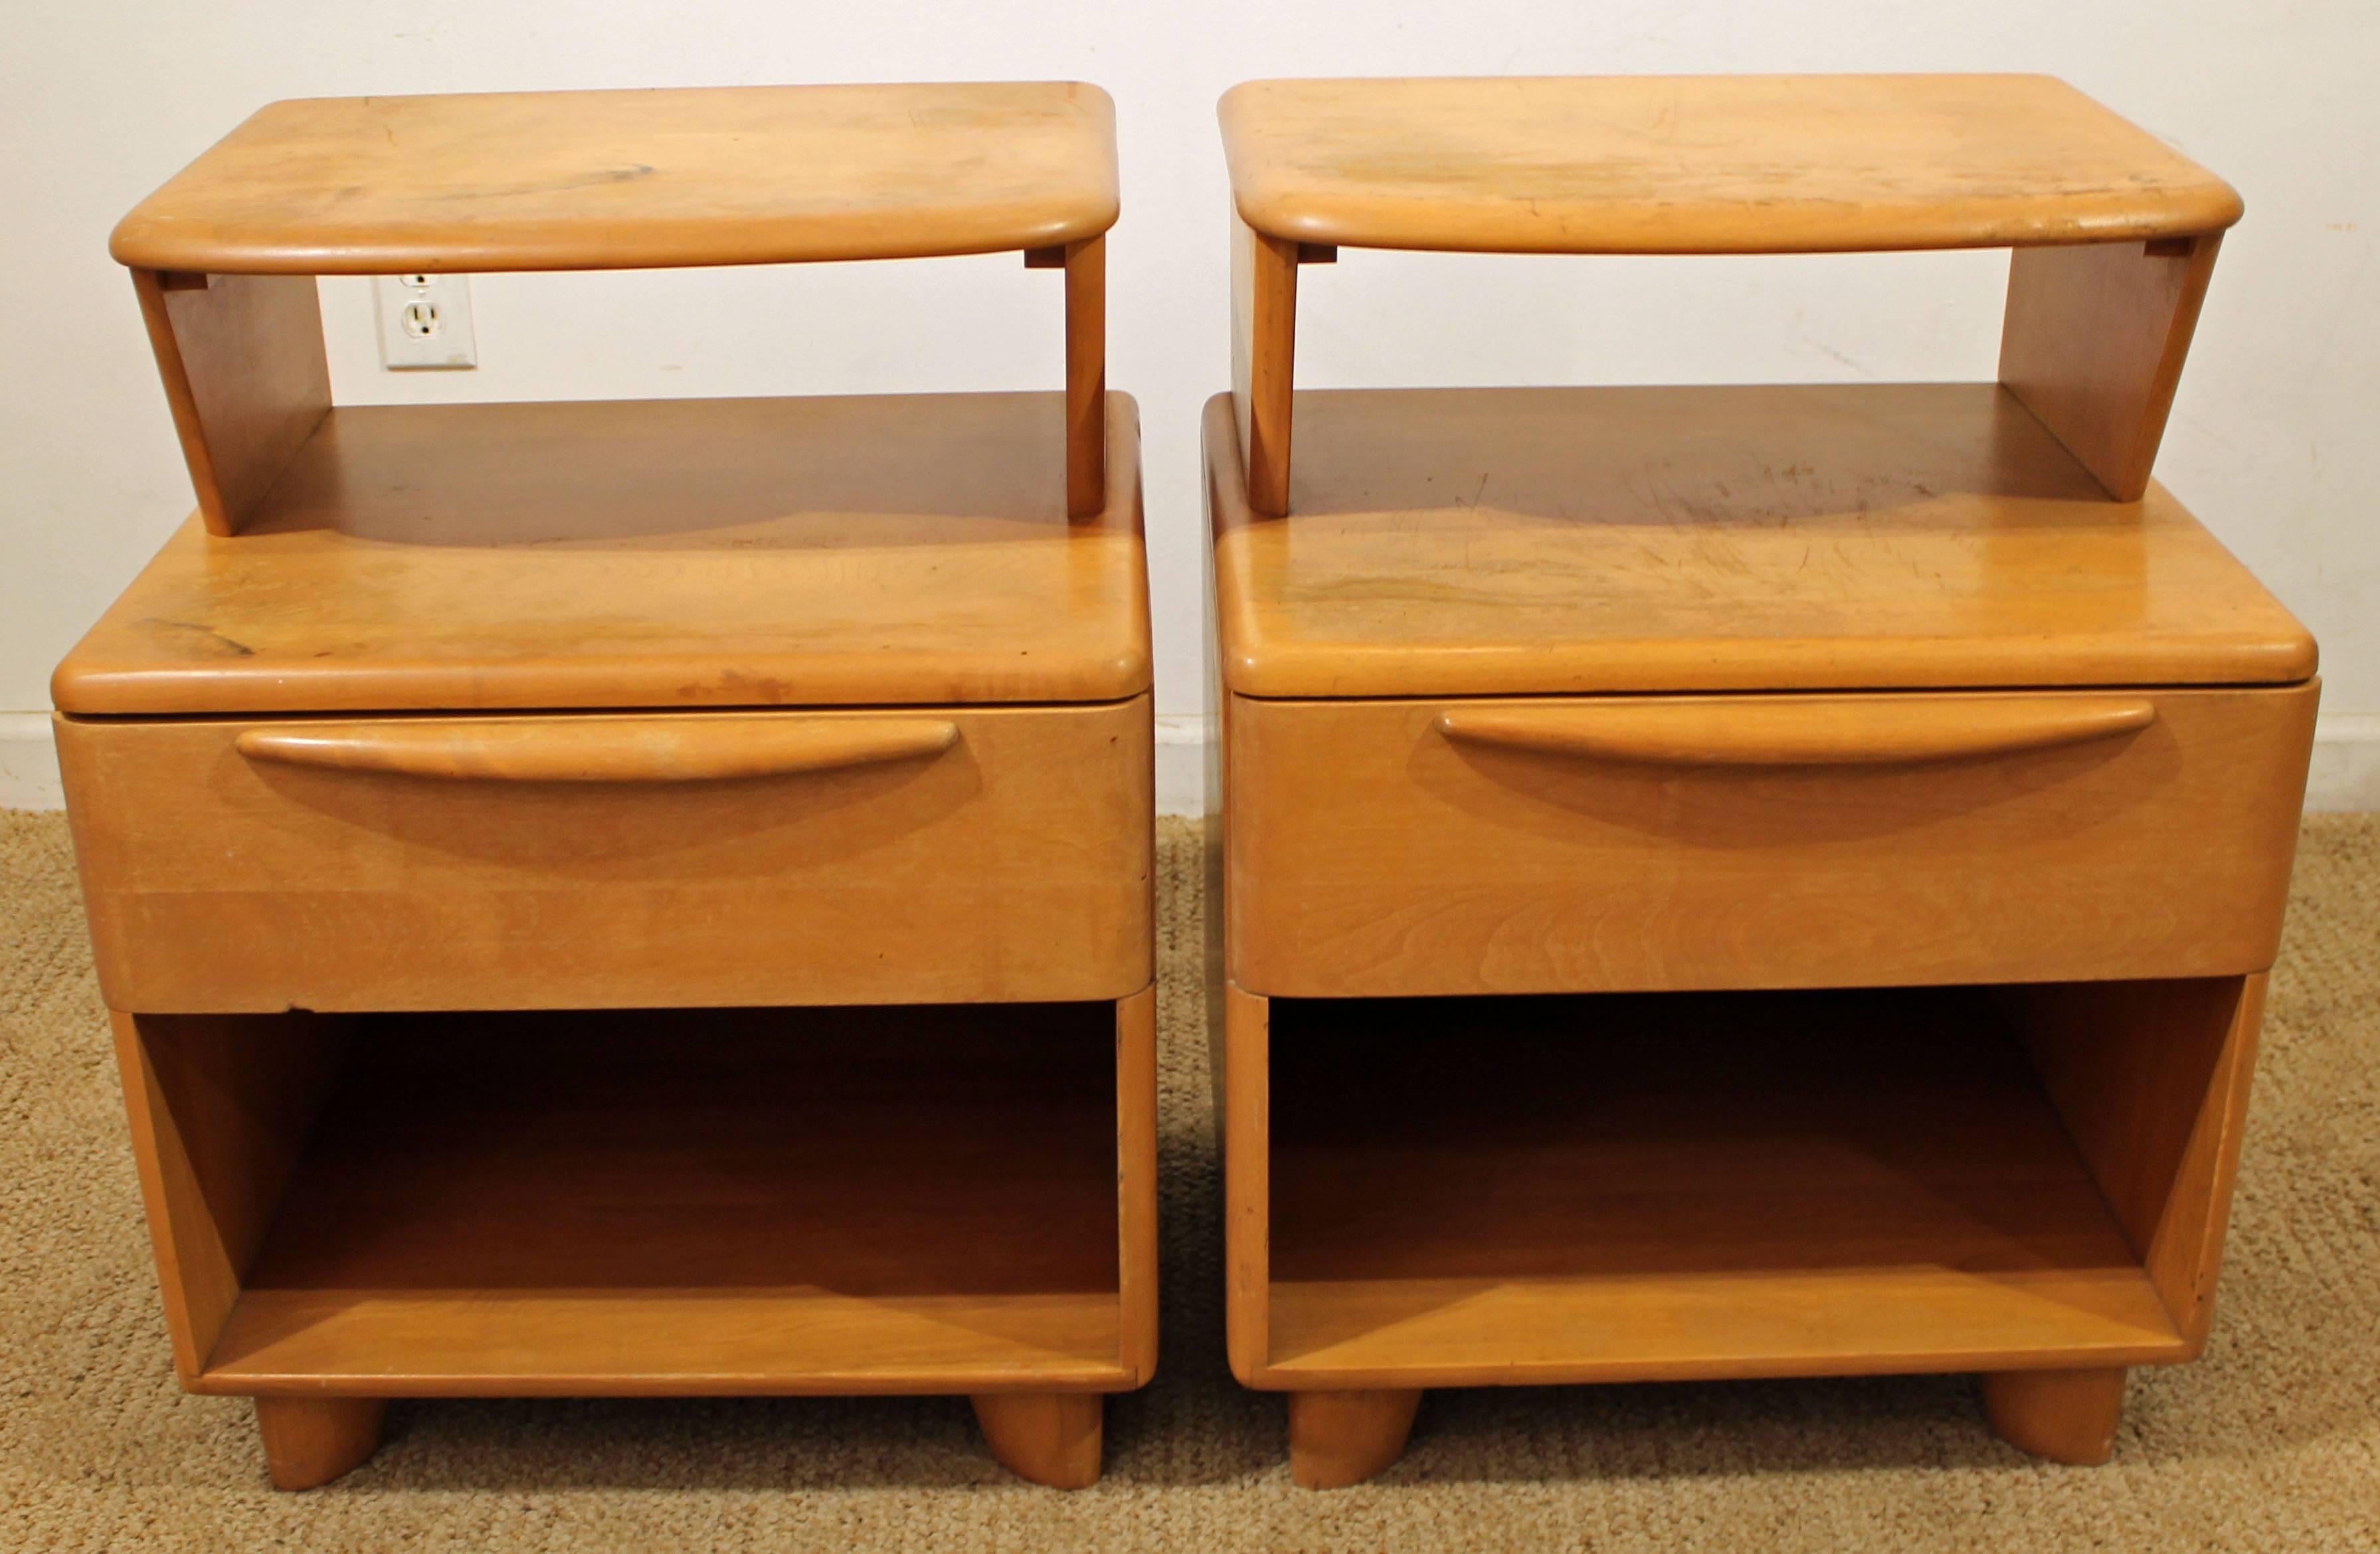 Offered is a pair of nightstands by Heywood-Wakefield. Each nightstand features one drawer and a shelf. The color is 'champagne'. They are in decent condition, but will need to be refinished. They are marked by Heywood-Wakefield.